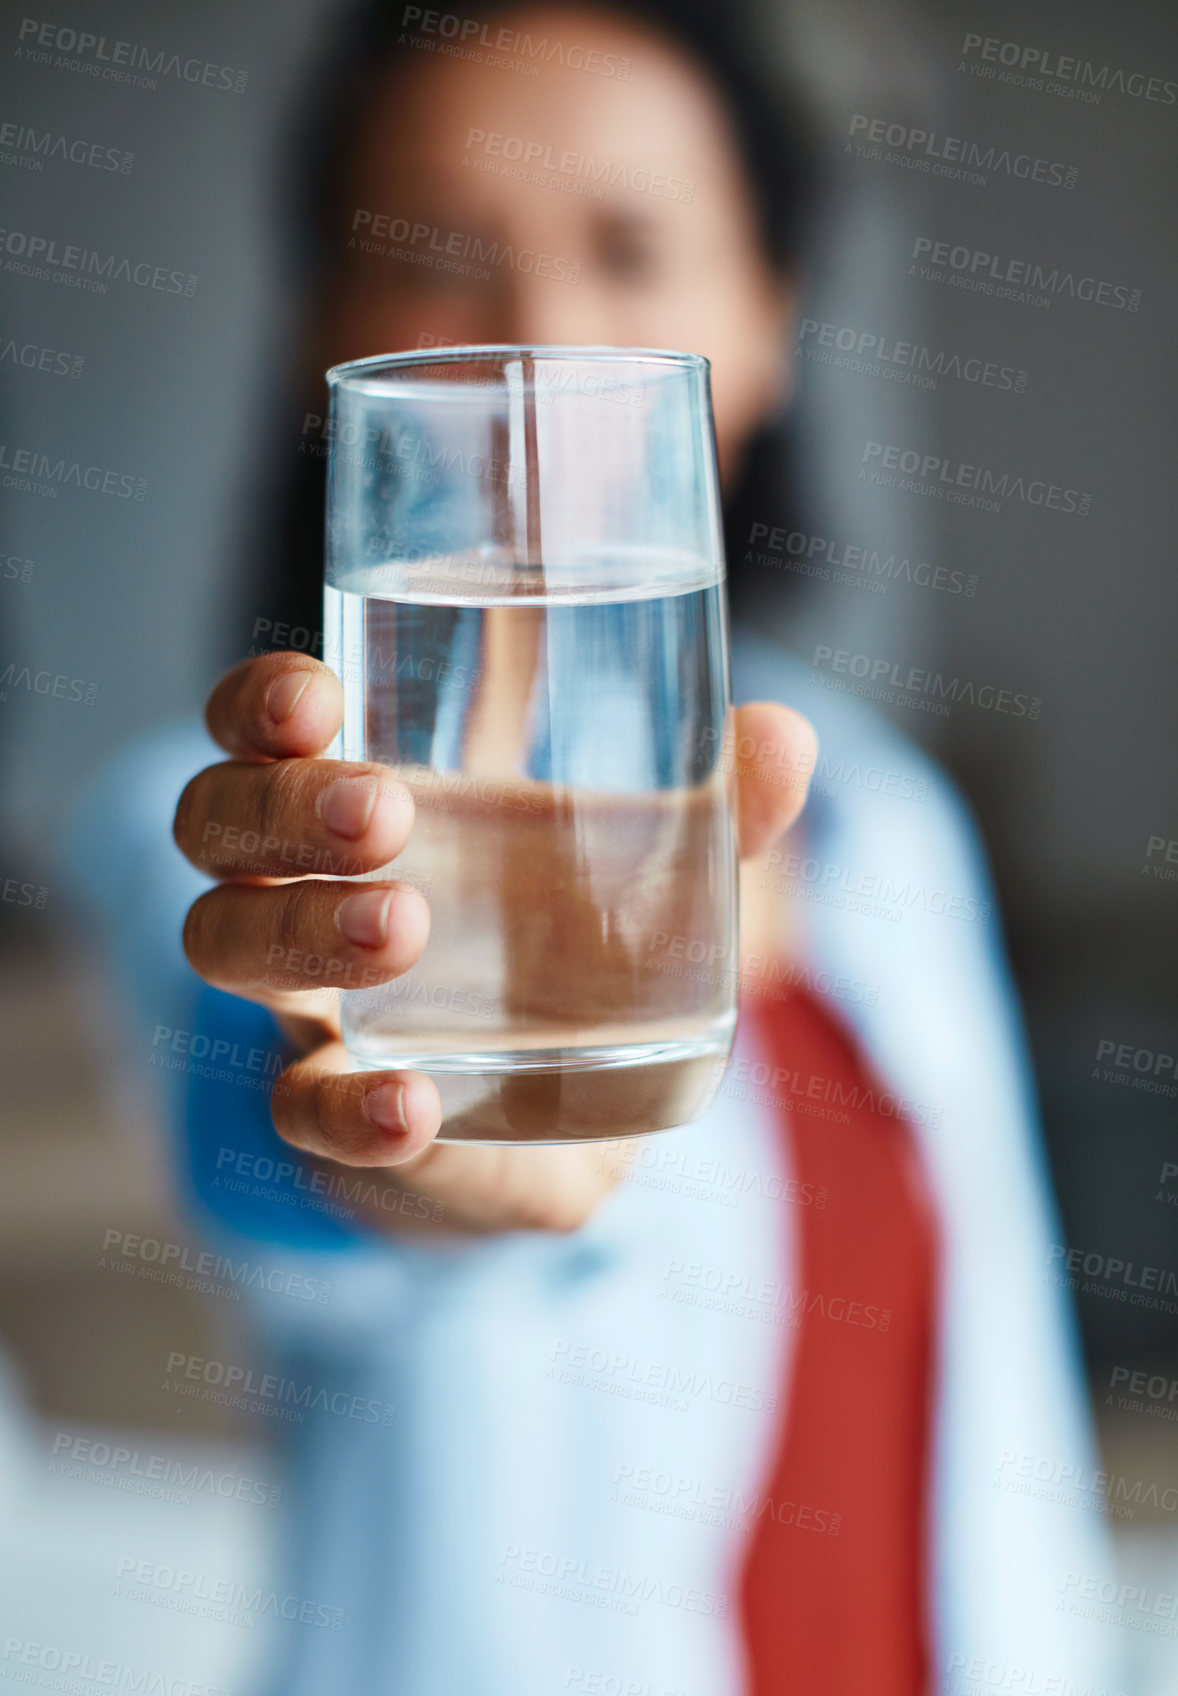 Buy stock photo Shot of a woman drinking a glass of water at home